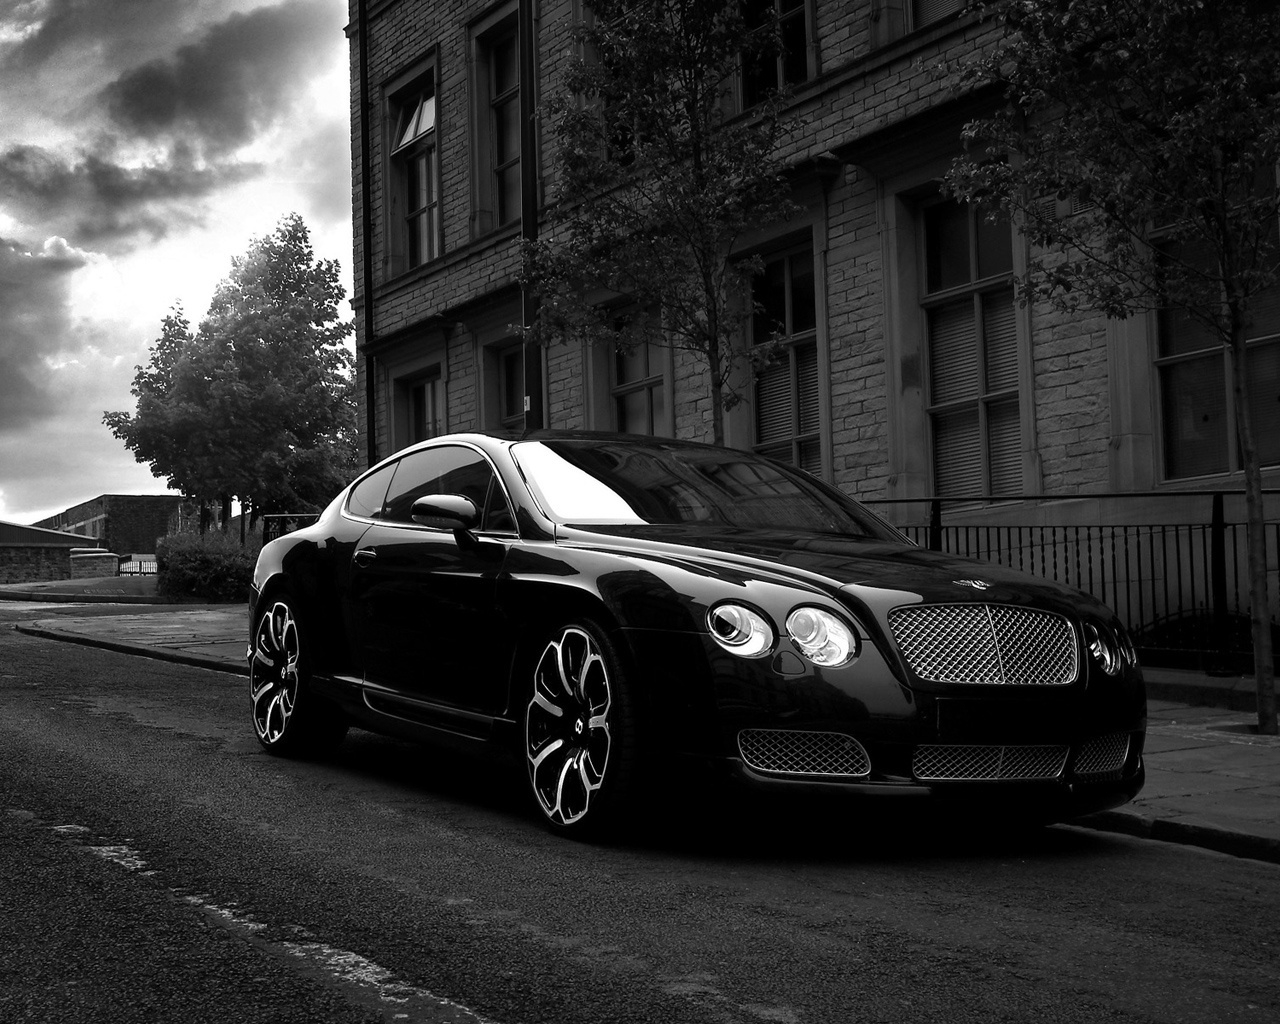 Bentley GTS Black Edition Project Kahn 2008 for 1280 x 1024 resolution